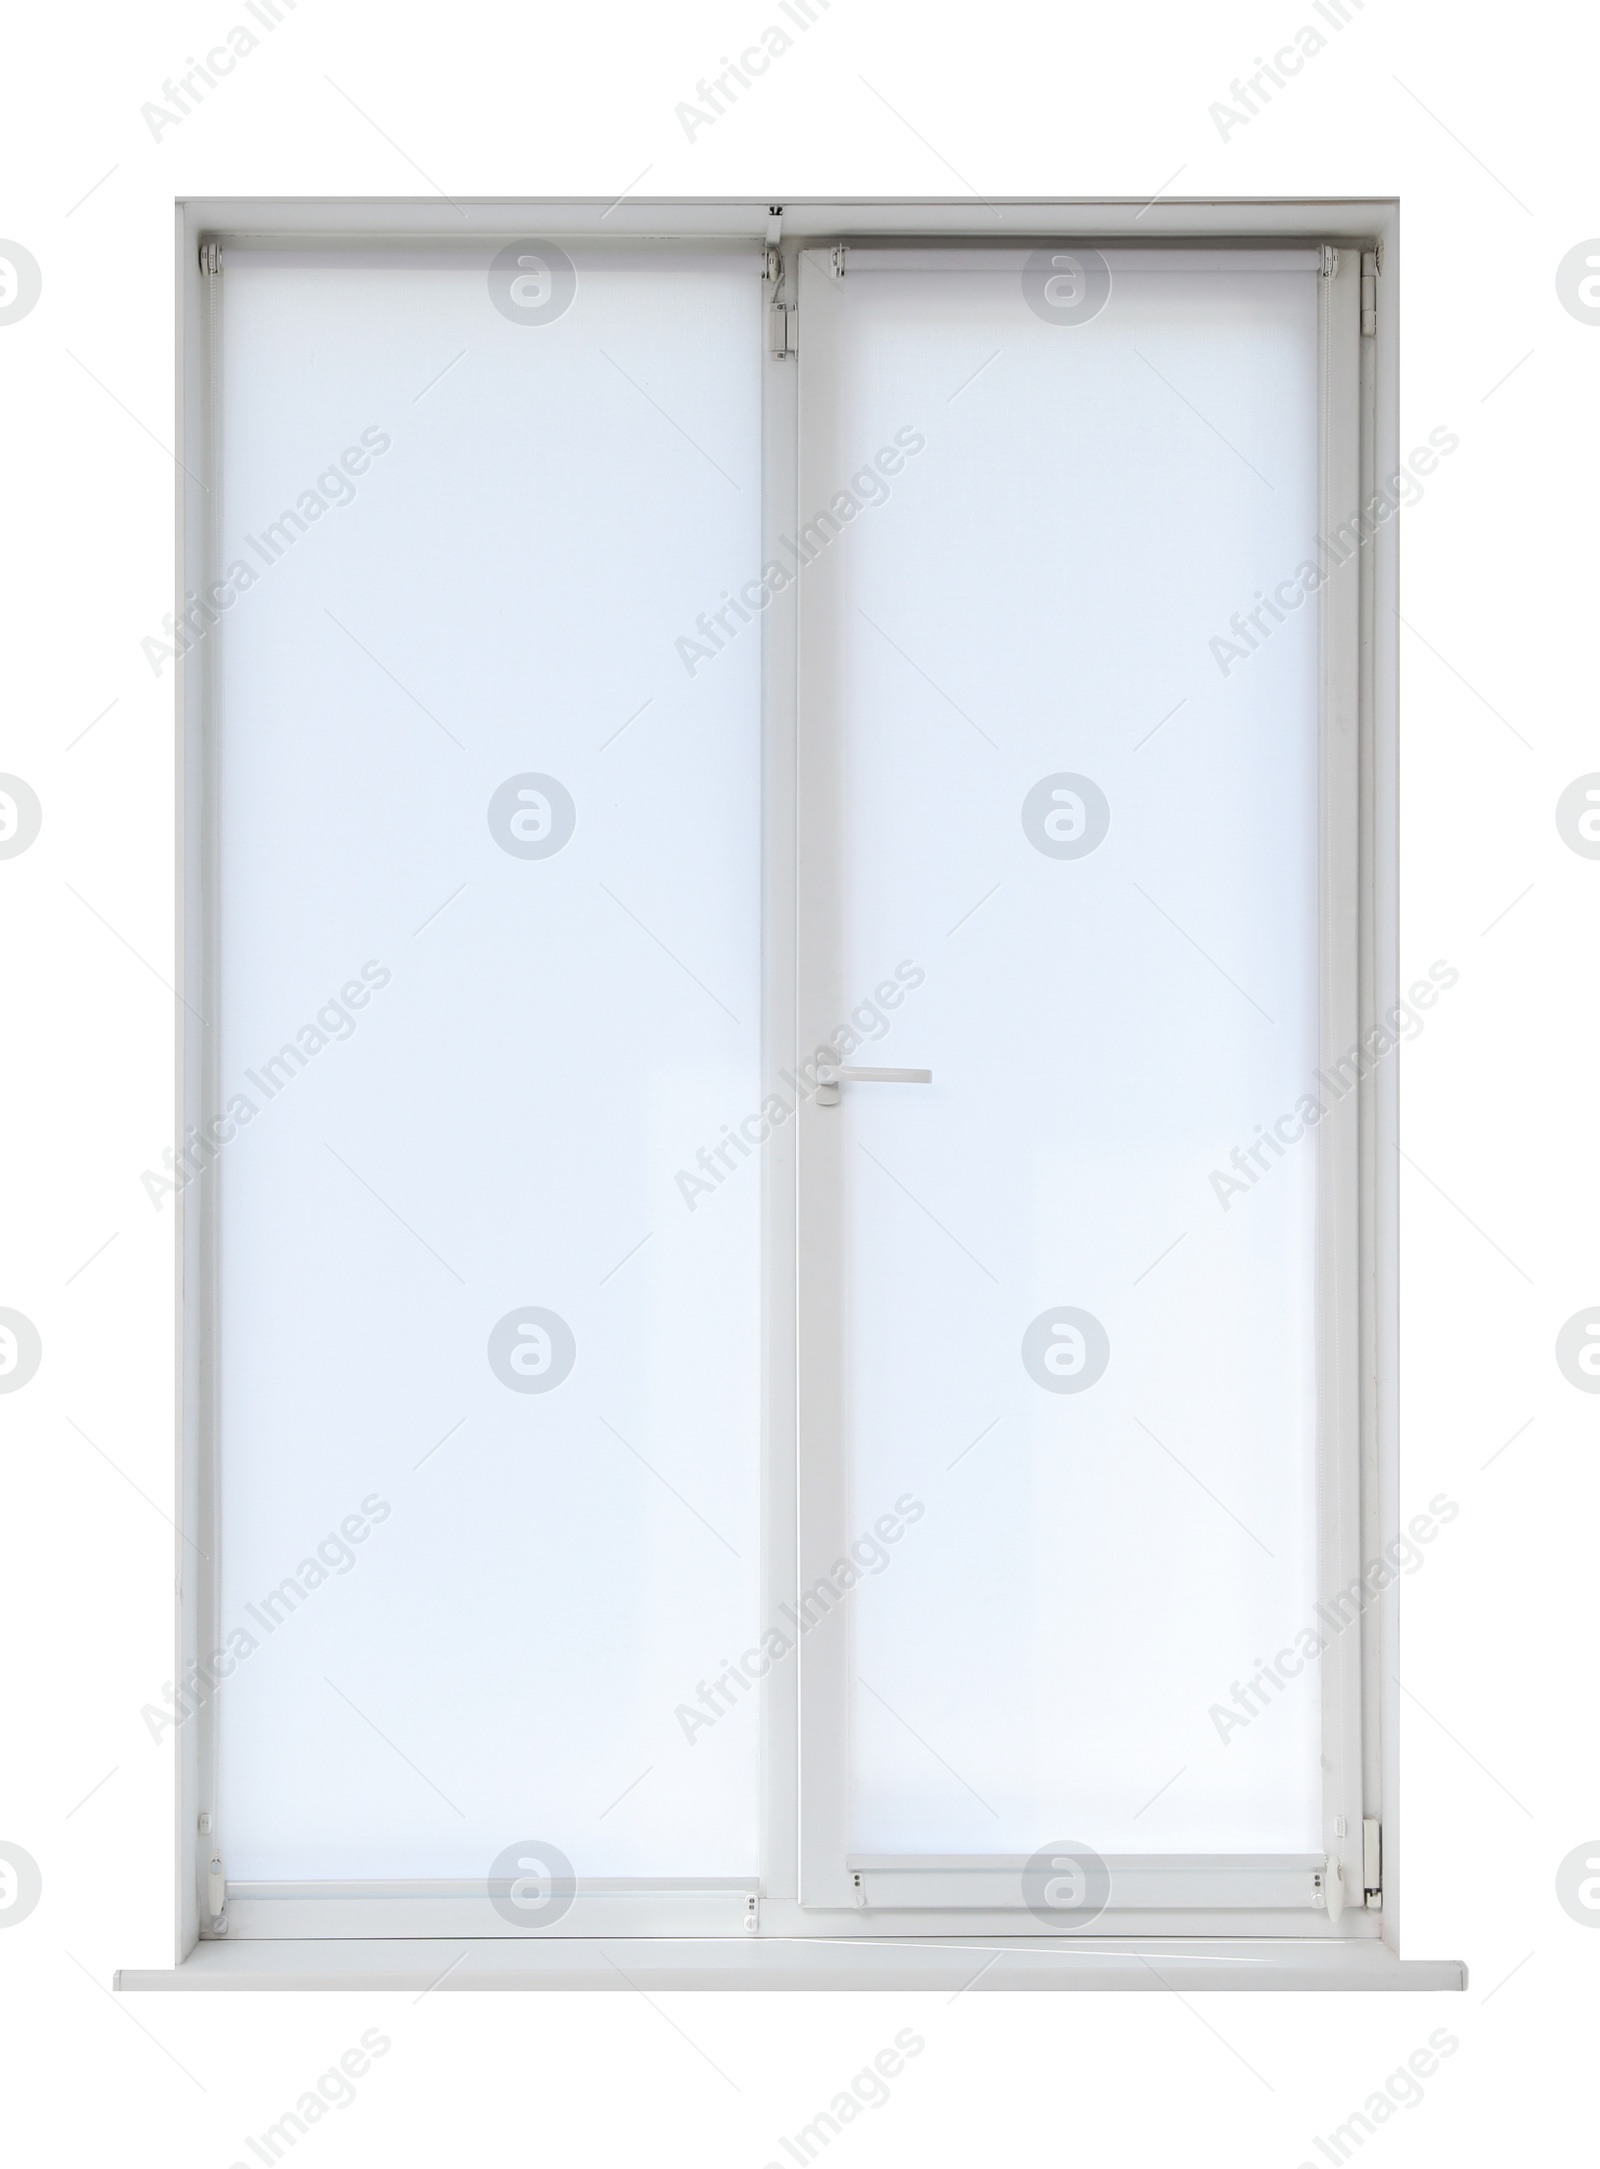 Image of Modern closed plastic window on white background